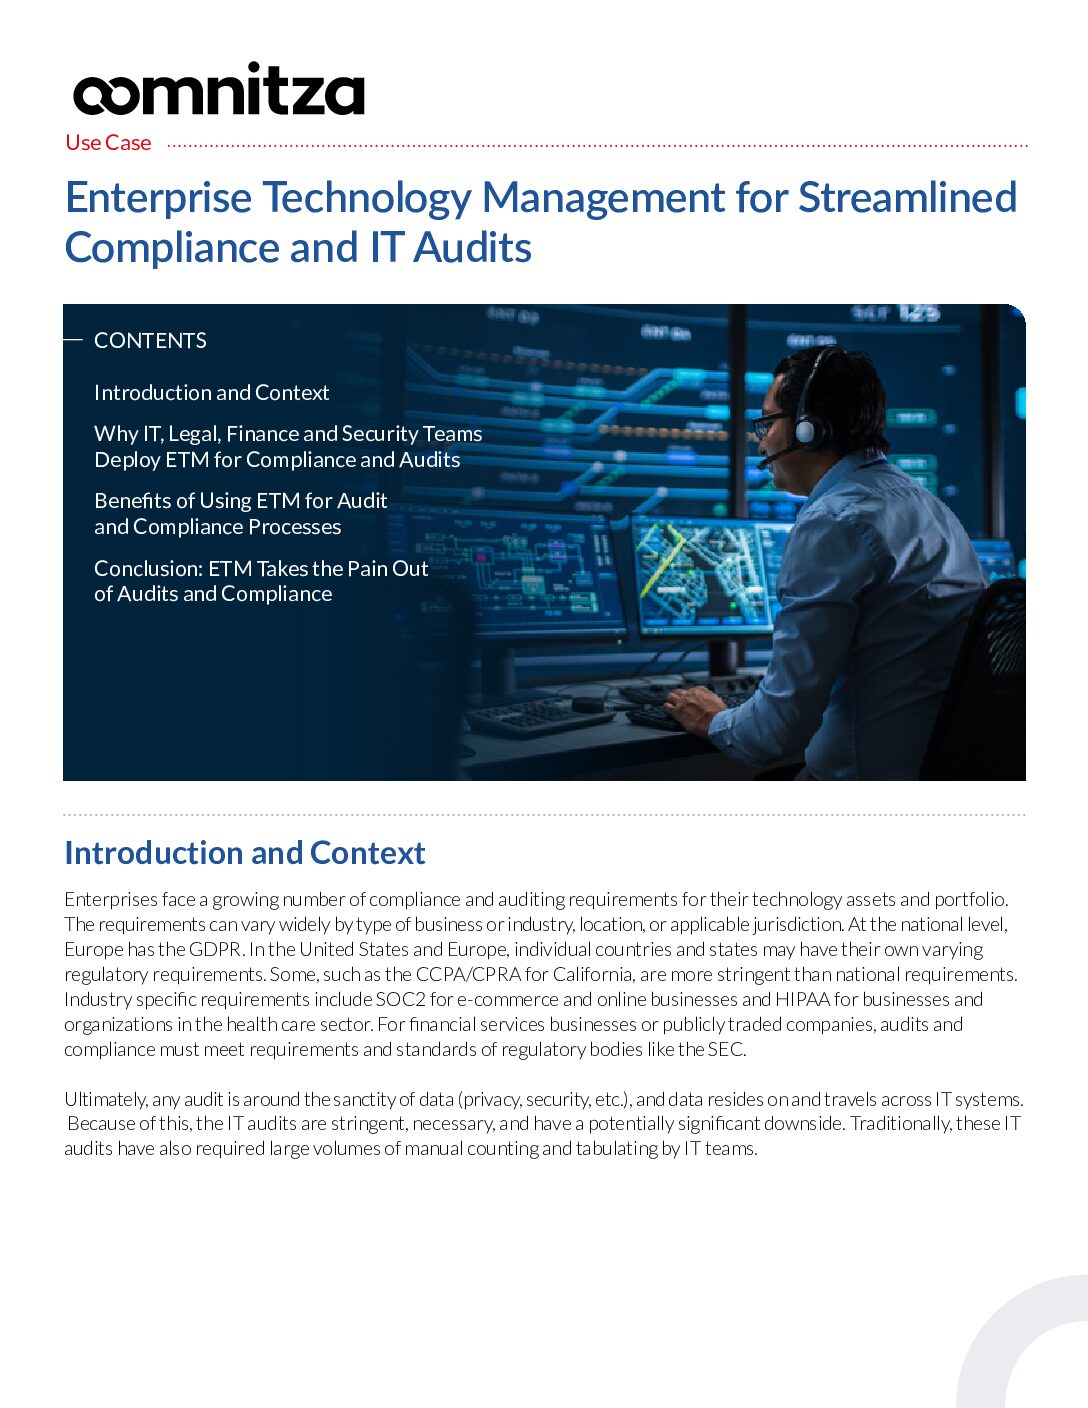 Featured image for Enterprise Technology Management for Streamlined Compliance and IT Audits Use Case